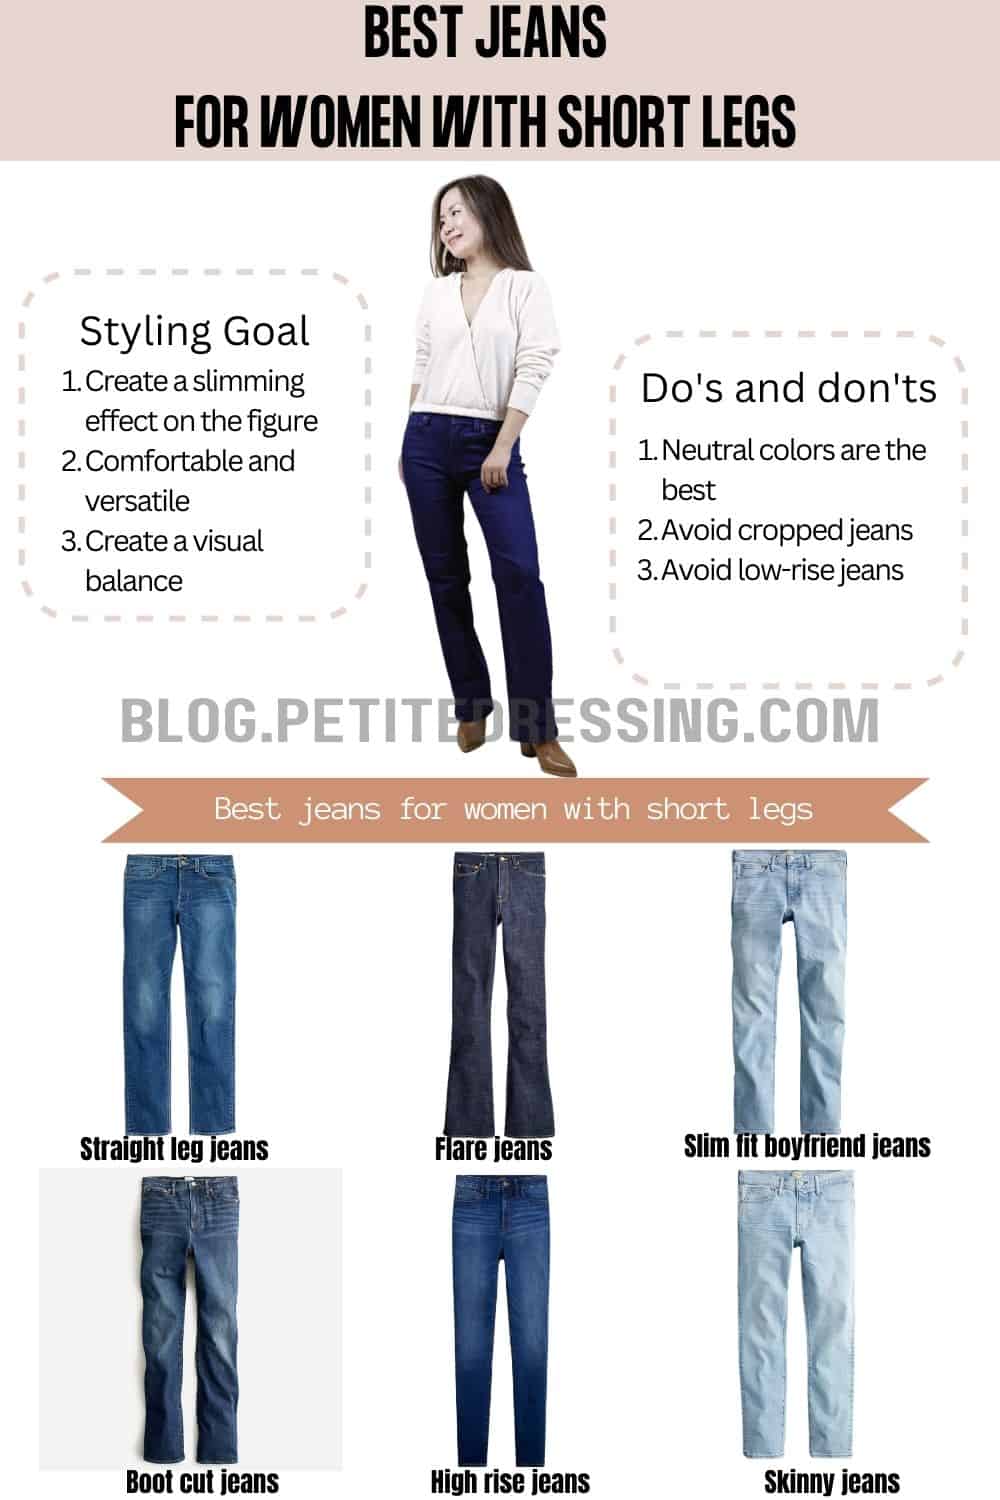 Autonom Tage en risiko pause The Complete Jeans Guide for Women with Short Legs